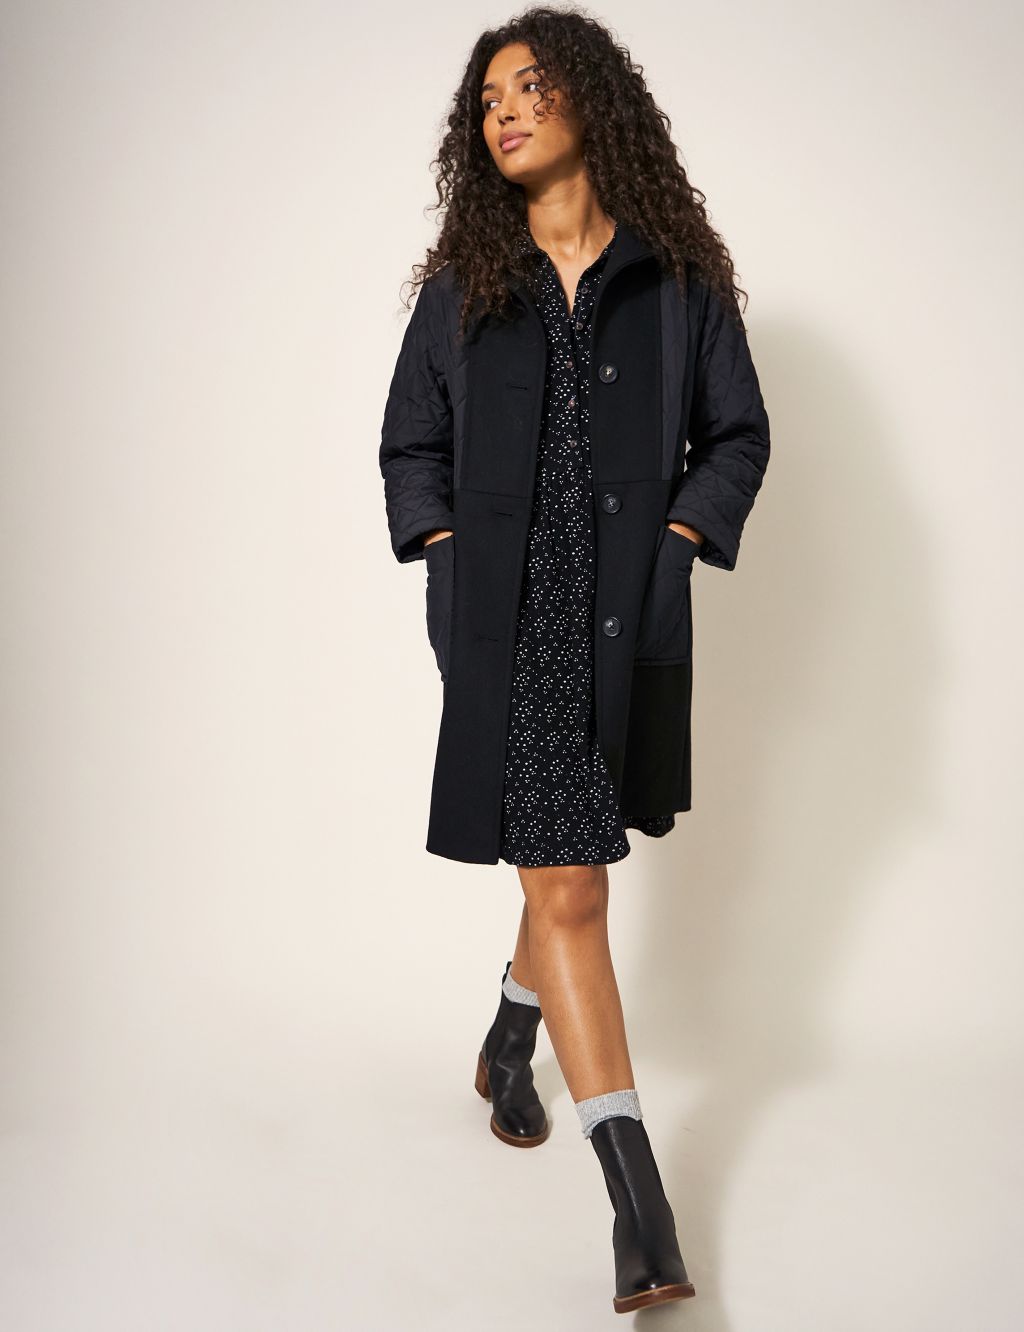 Textured Pea Coat with Wool image 1